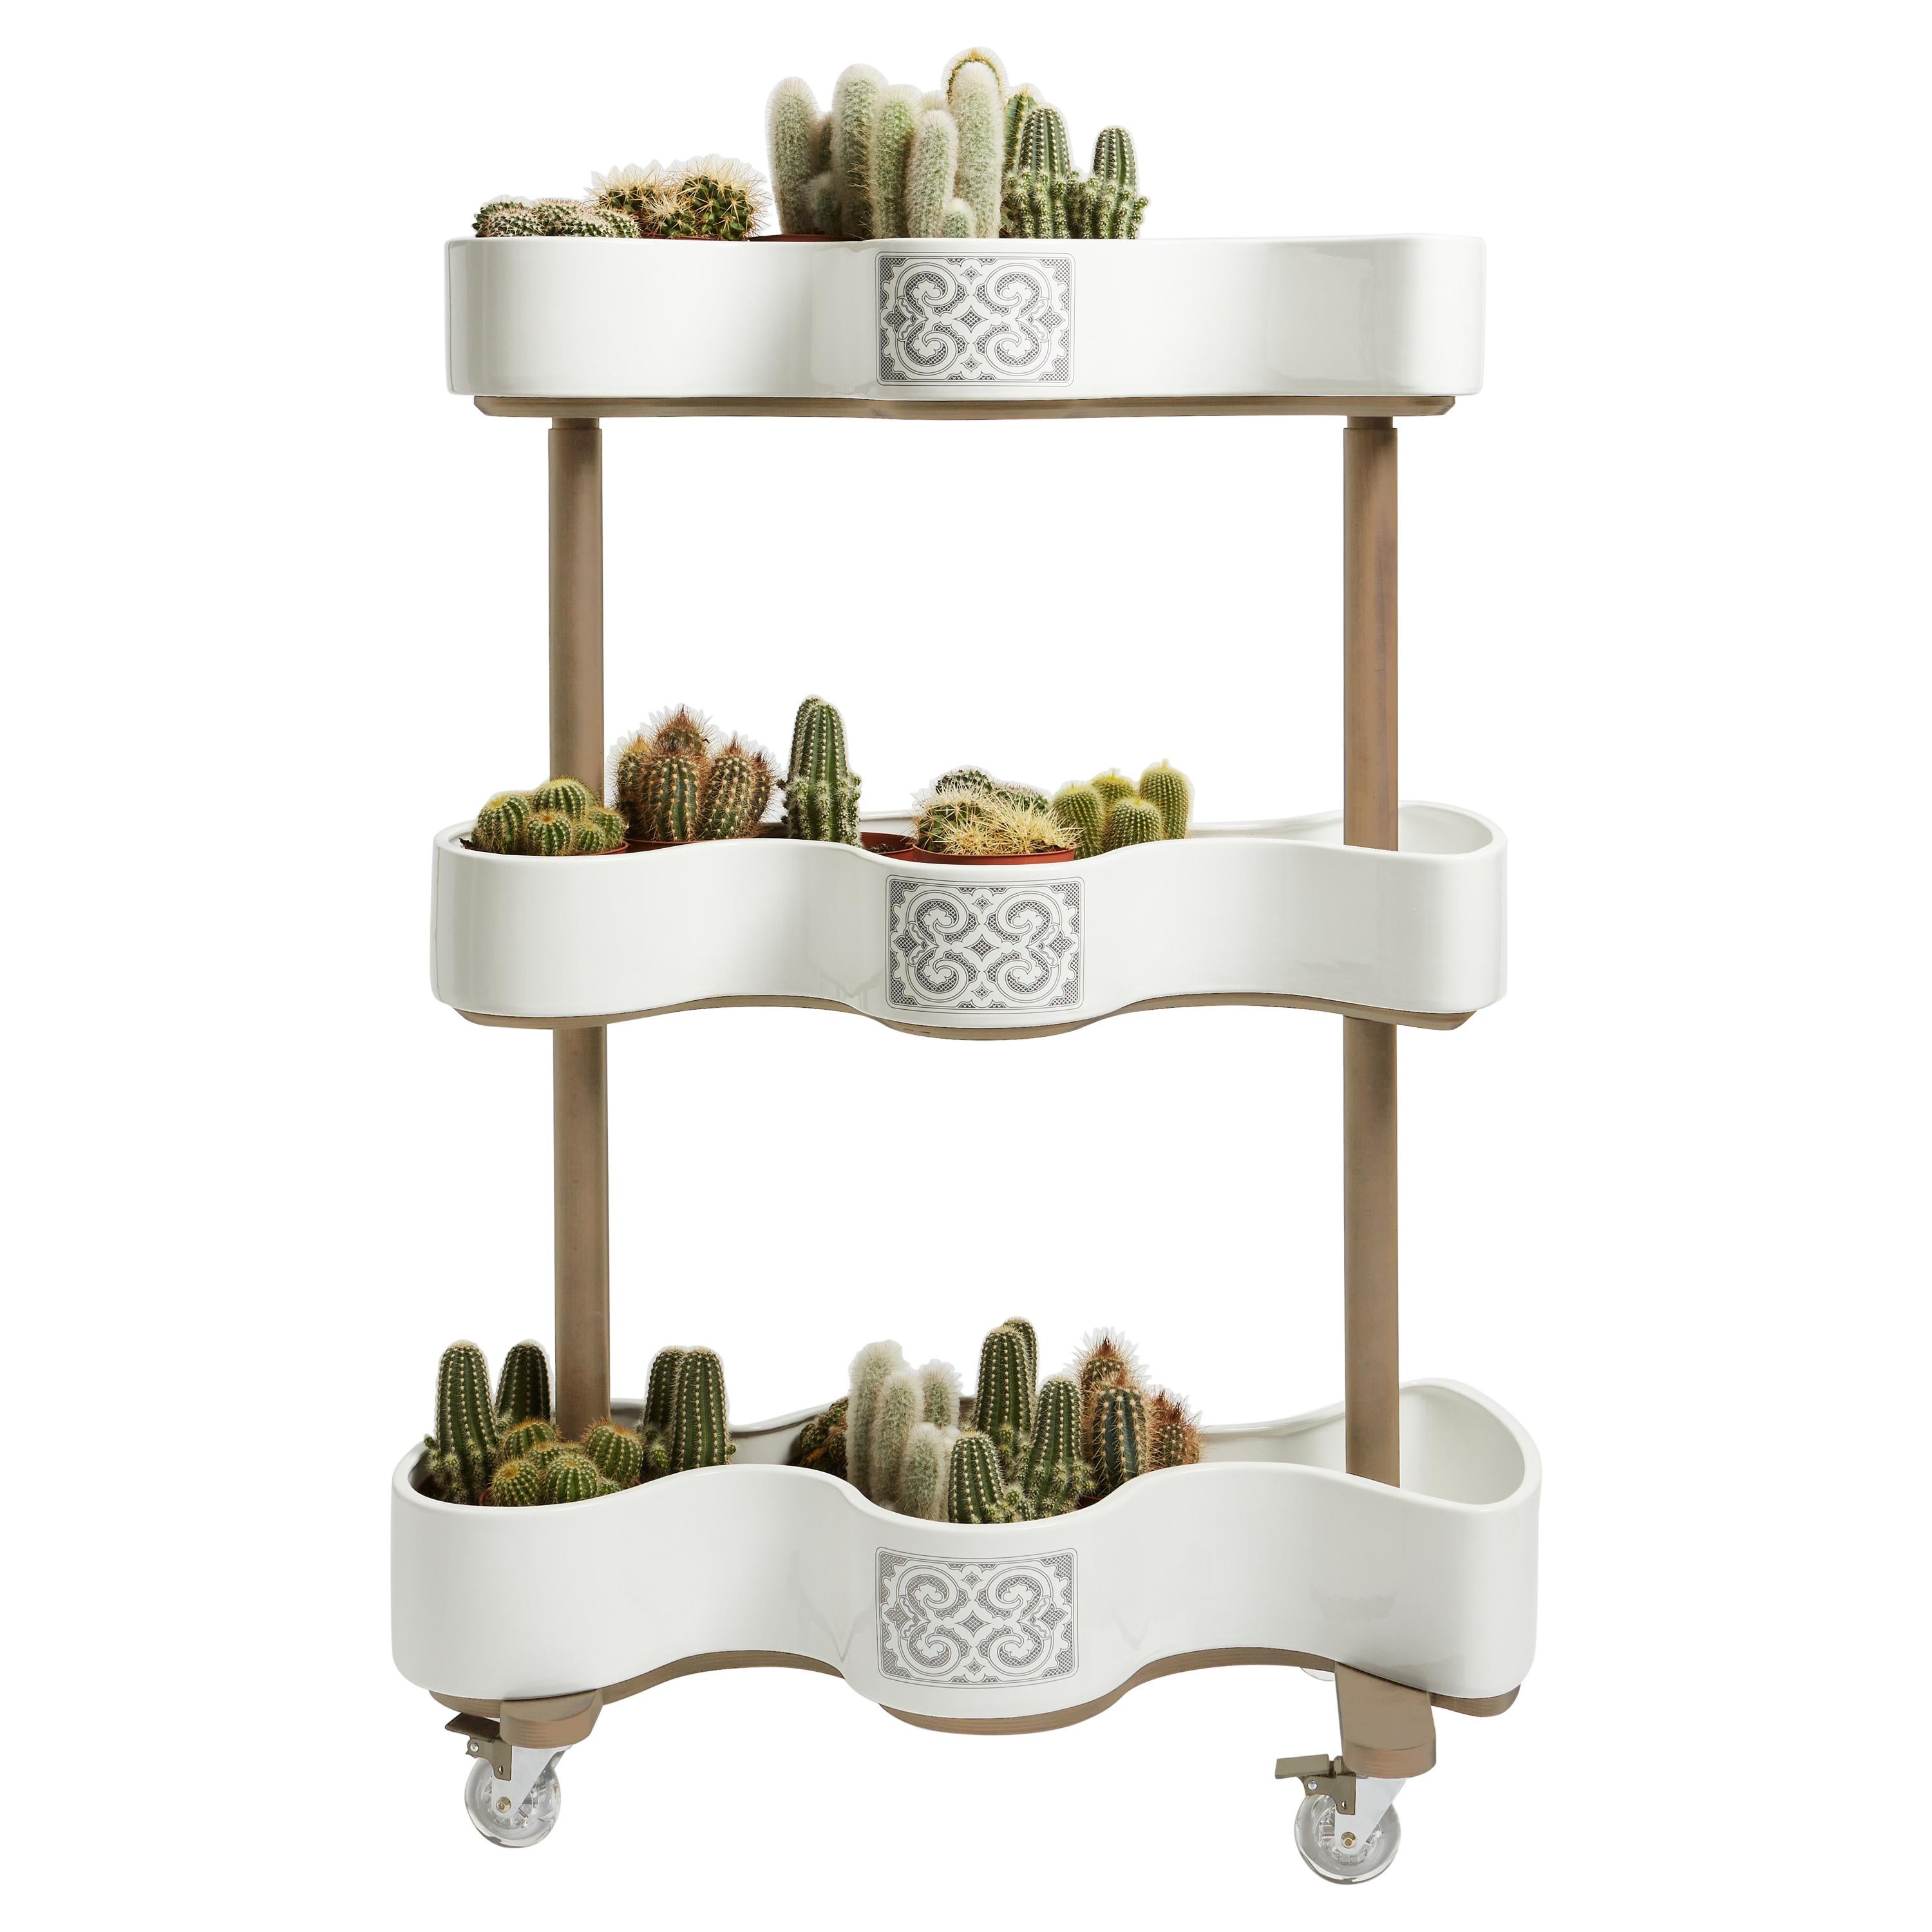 Vertical garden cart of ceramic and beech wood from the SoShiro Ainu collection For Sale